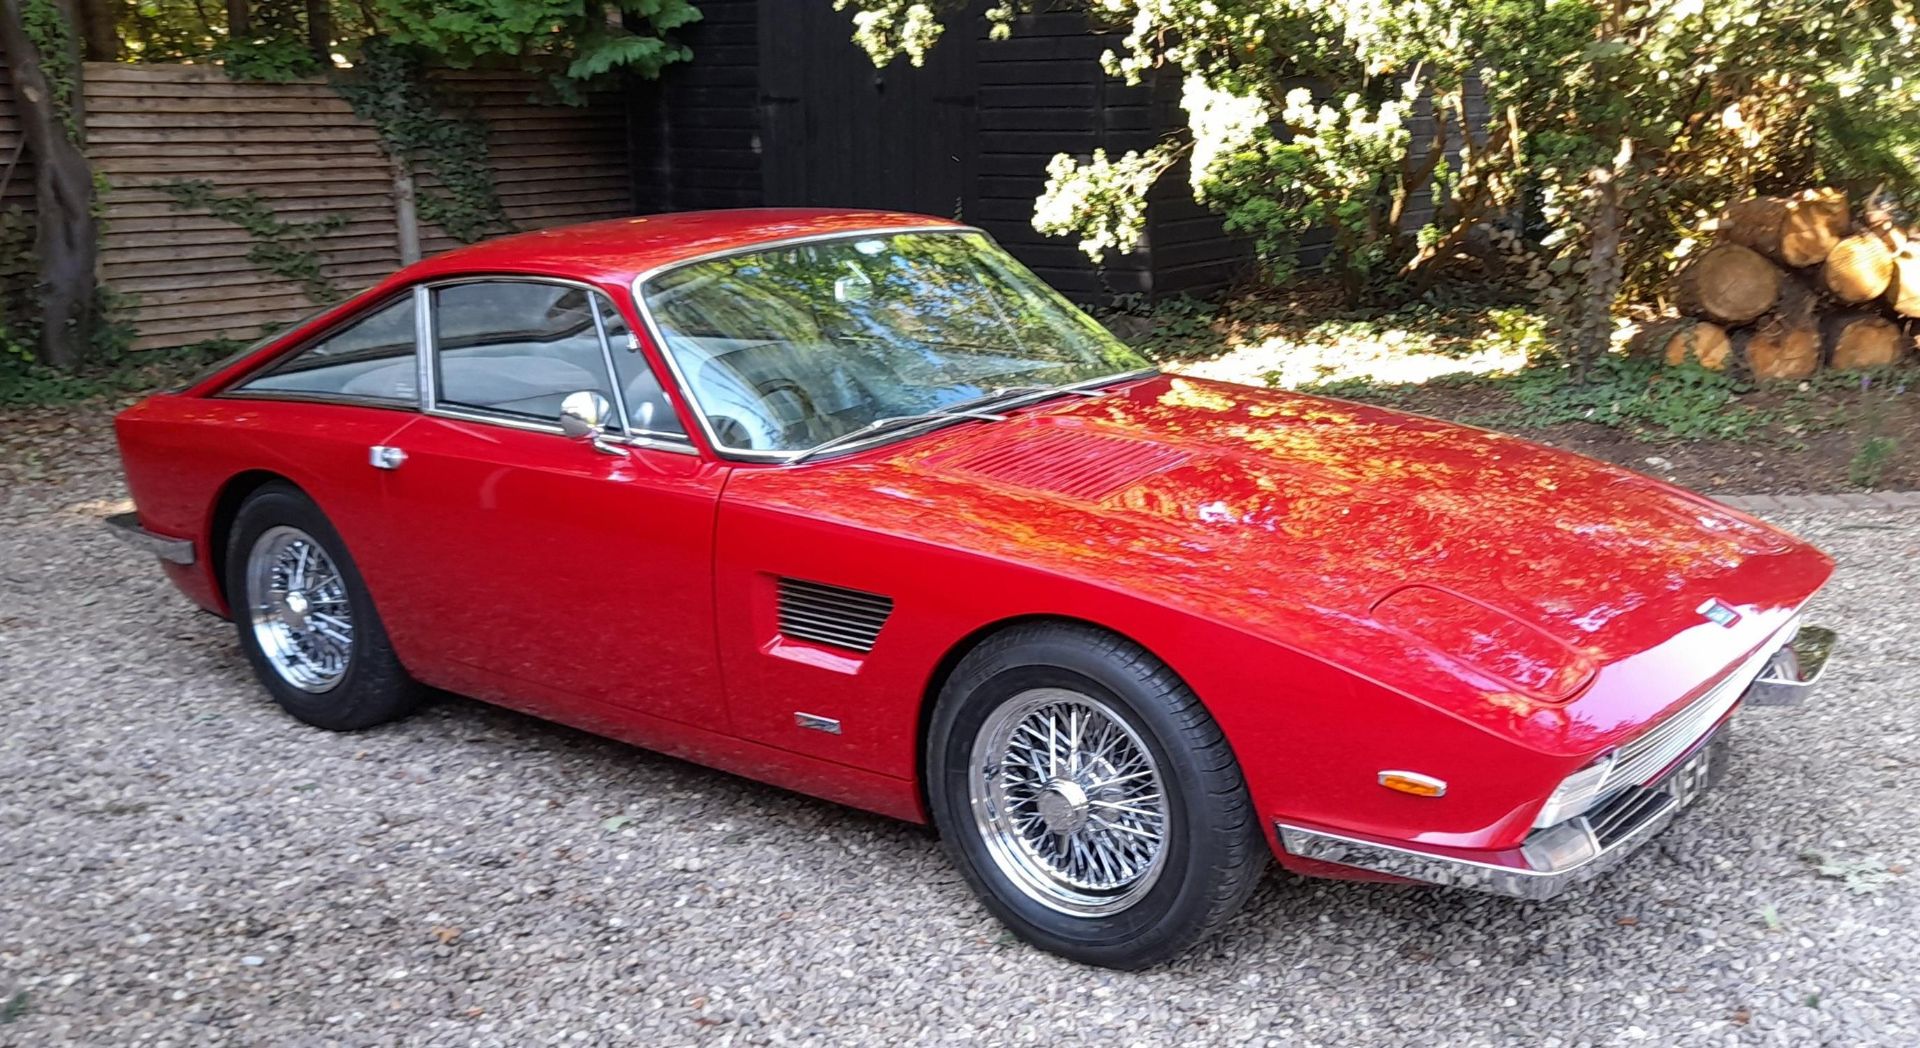 1965 TVR Trident - Image 6 of 11